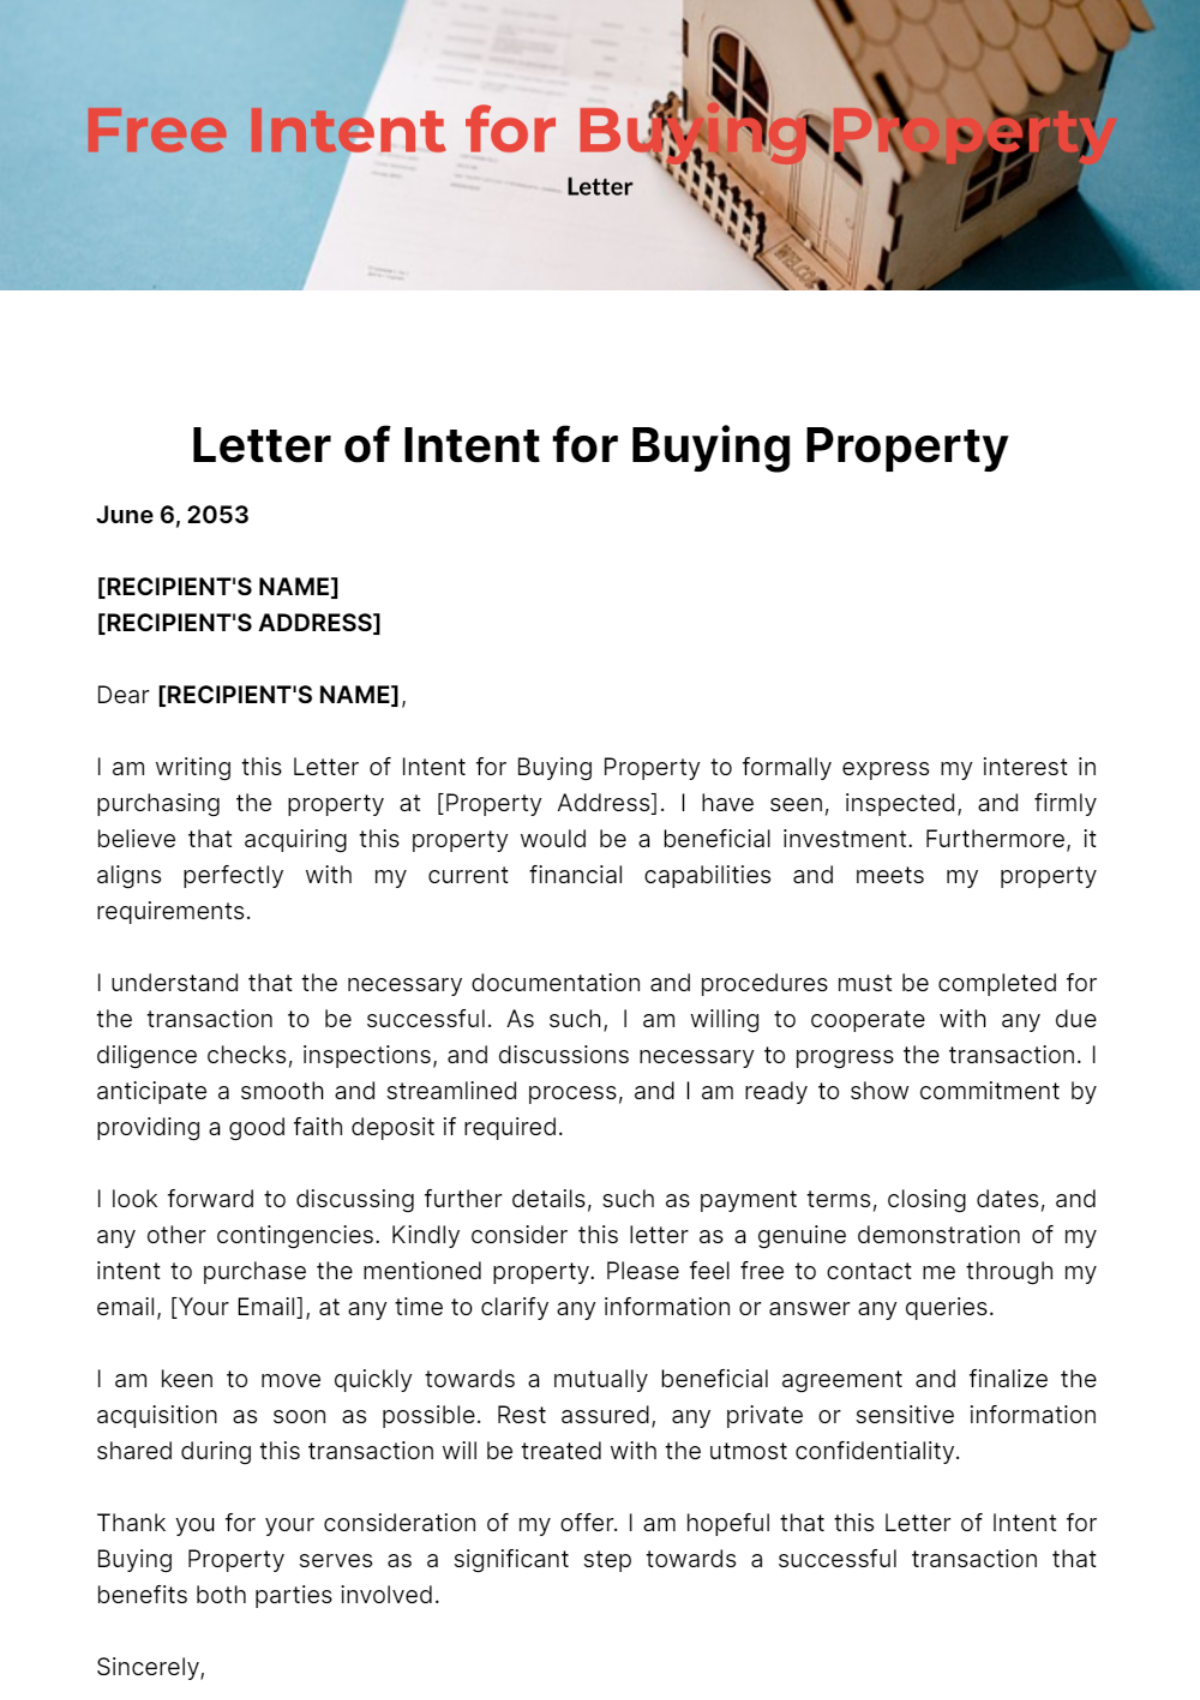 Free Letter of Intent for Buying Property Template